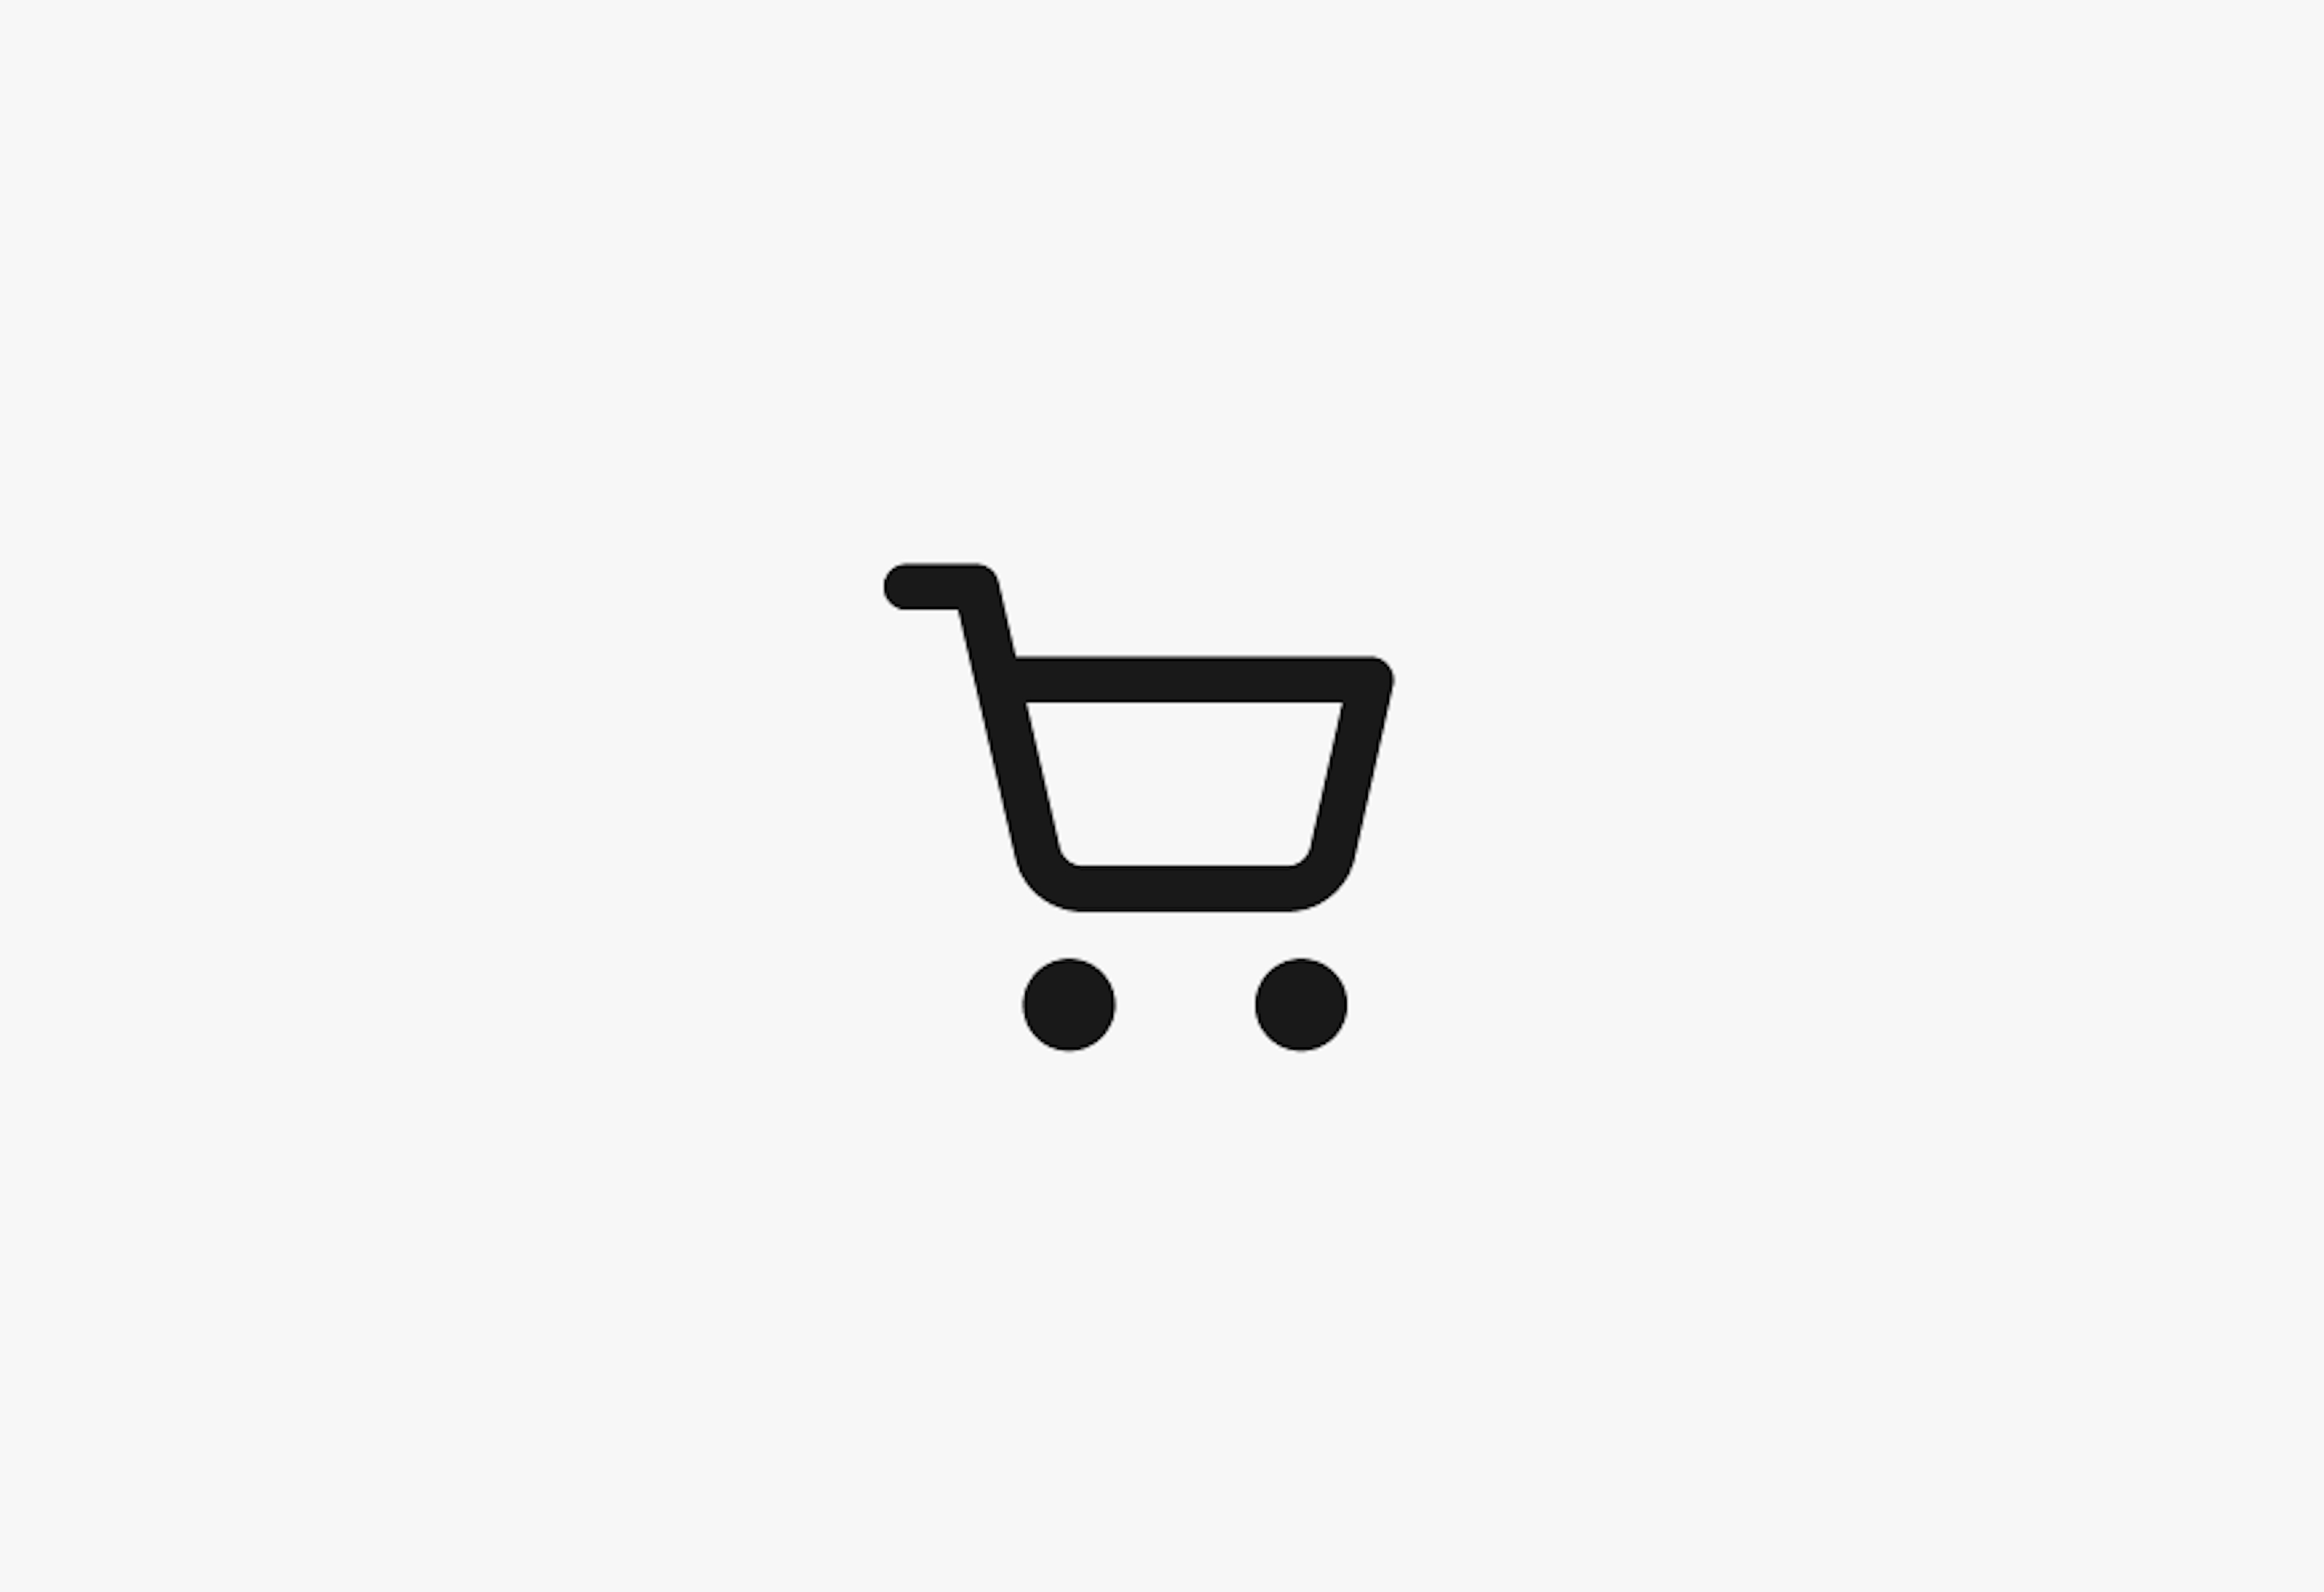 The official cart icon from the icon library.